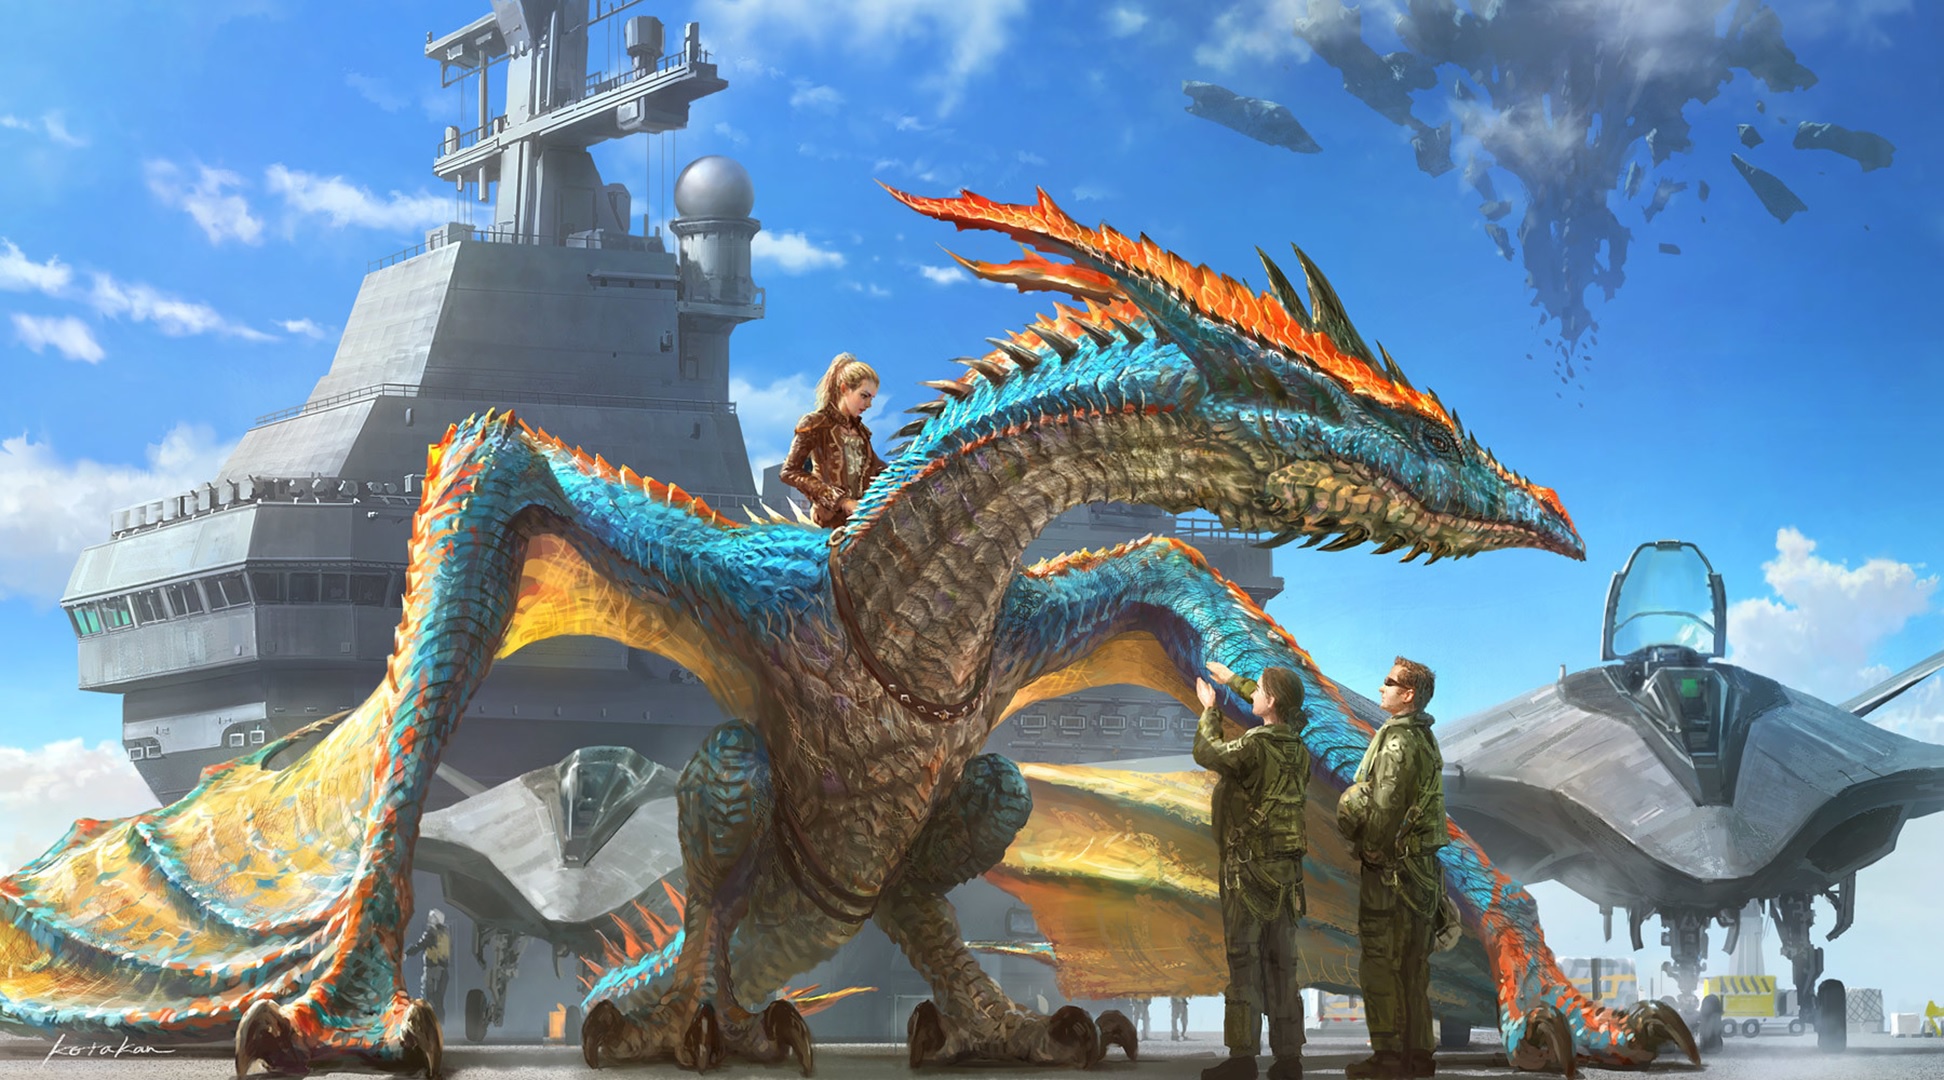 Riding a dragon on an aircraft carrier by Kou Takano